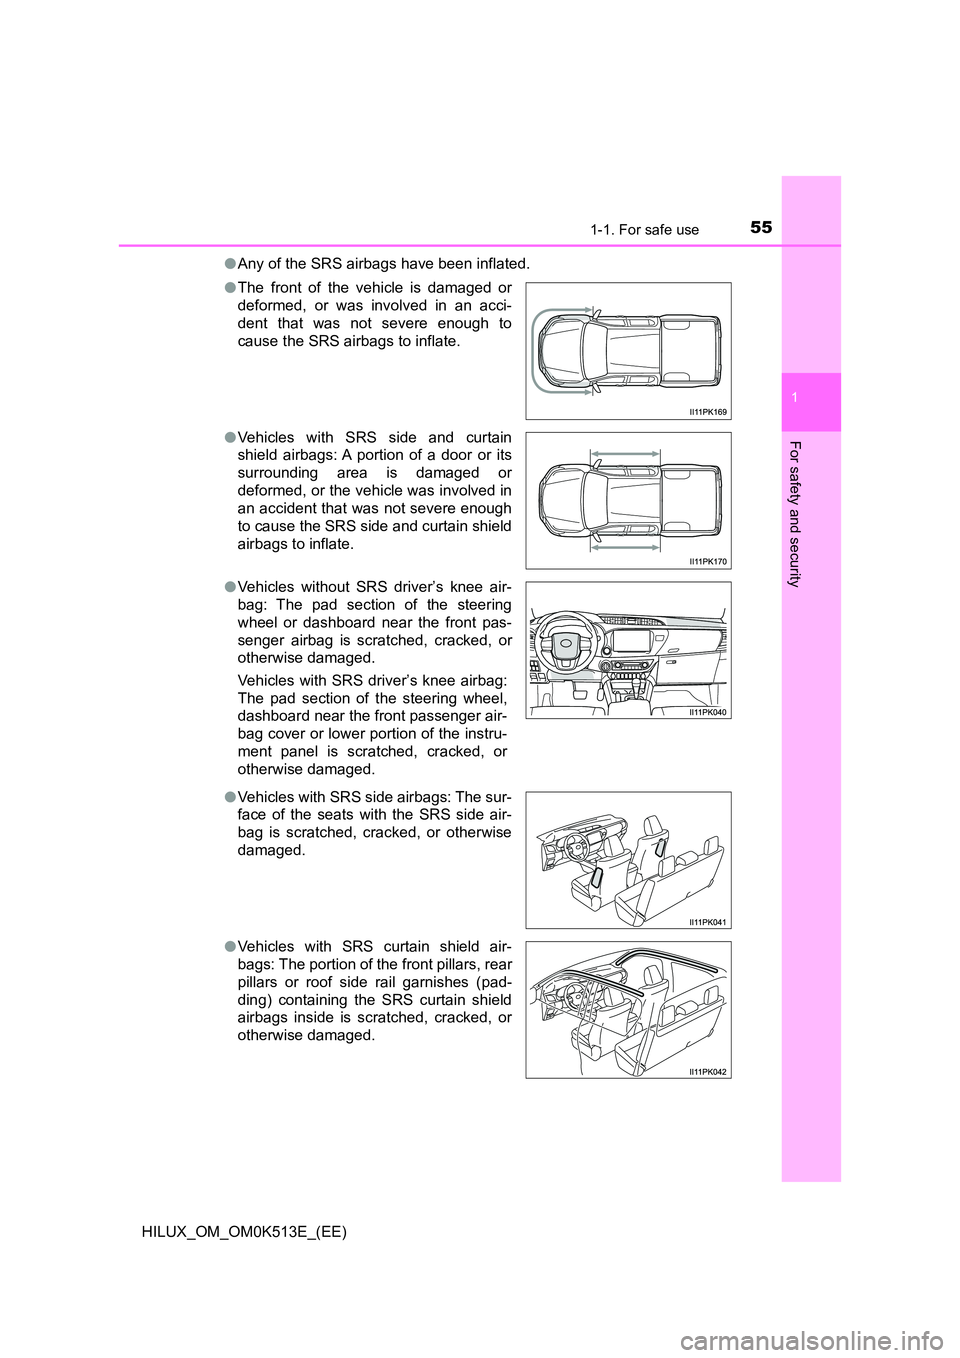 TOYOTA HILUX 2021  Owners Manual (in English) 551-1. For safe use
1
HILUX_OM_OM0K513E_(EE)
For safety and security
�OAny of the SRS airbags have been inflated. 
�O The front of the vehicle is damaged or 
deformed, or was involved in an acci- 
den